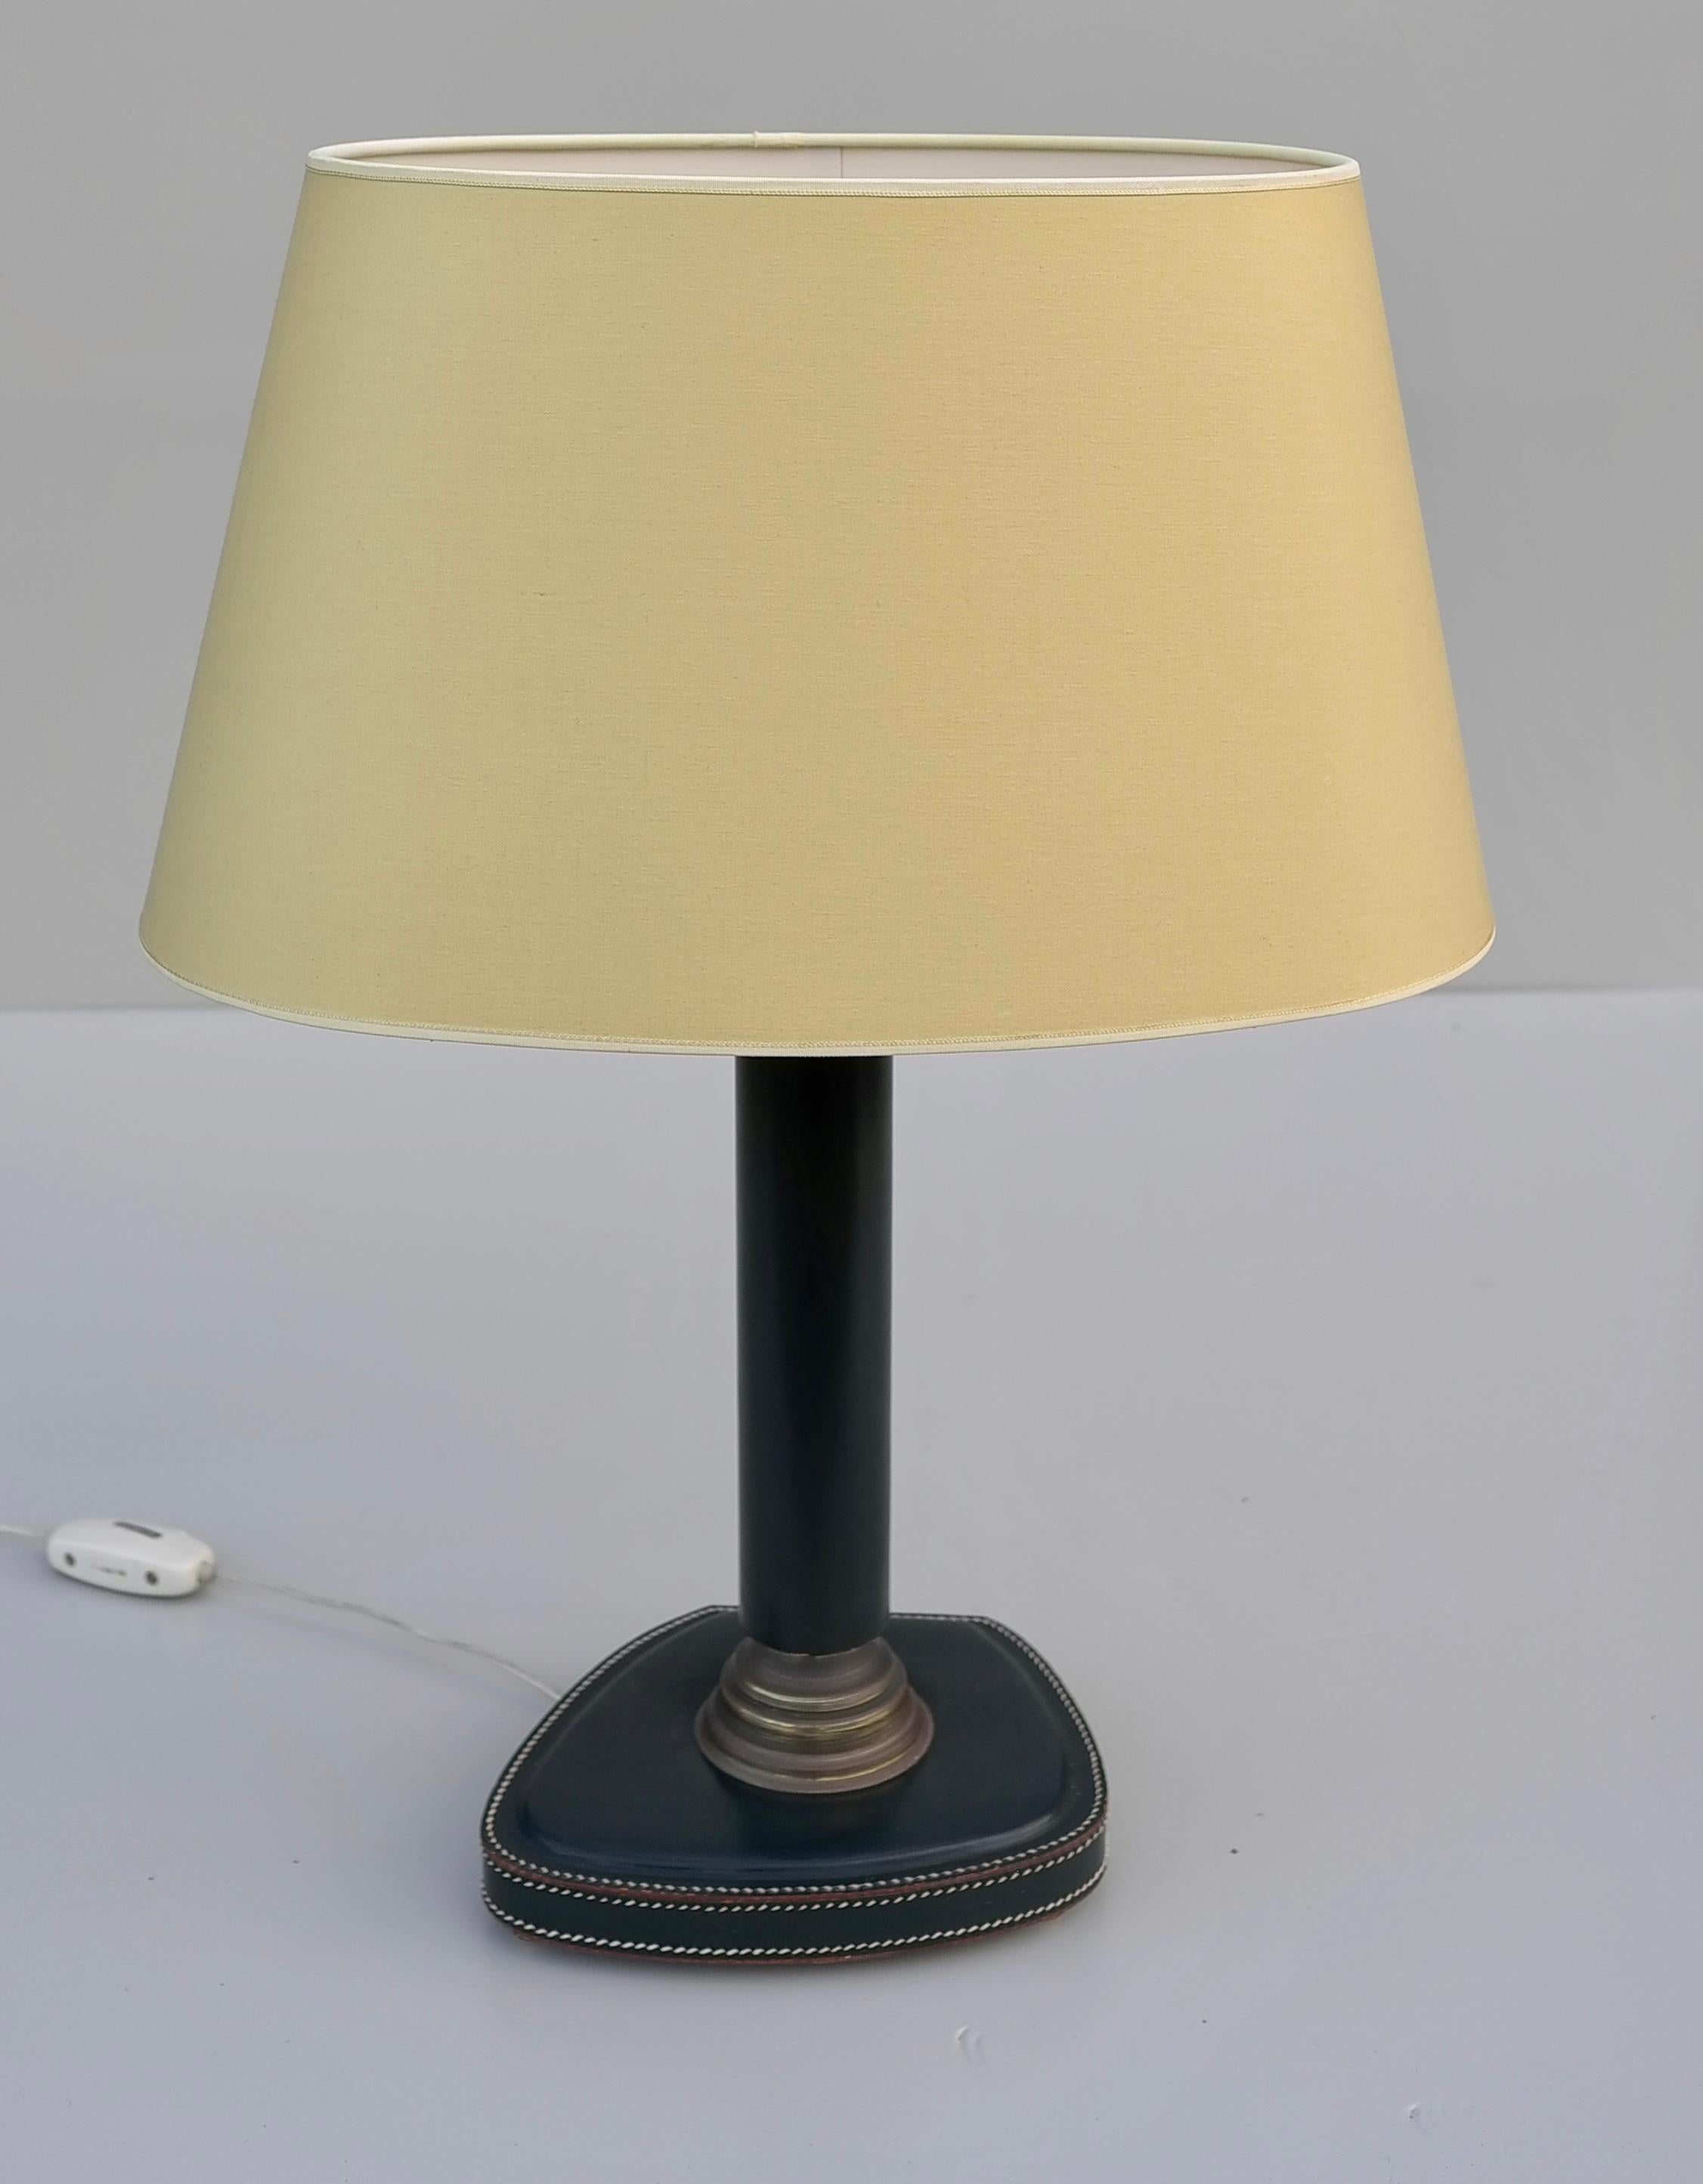 Hand-Stitched Green Leather Table Lamp, France, 1960s In Good Condition For Sale In Den Haag, NL